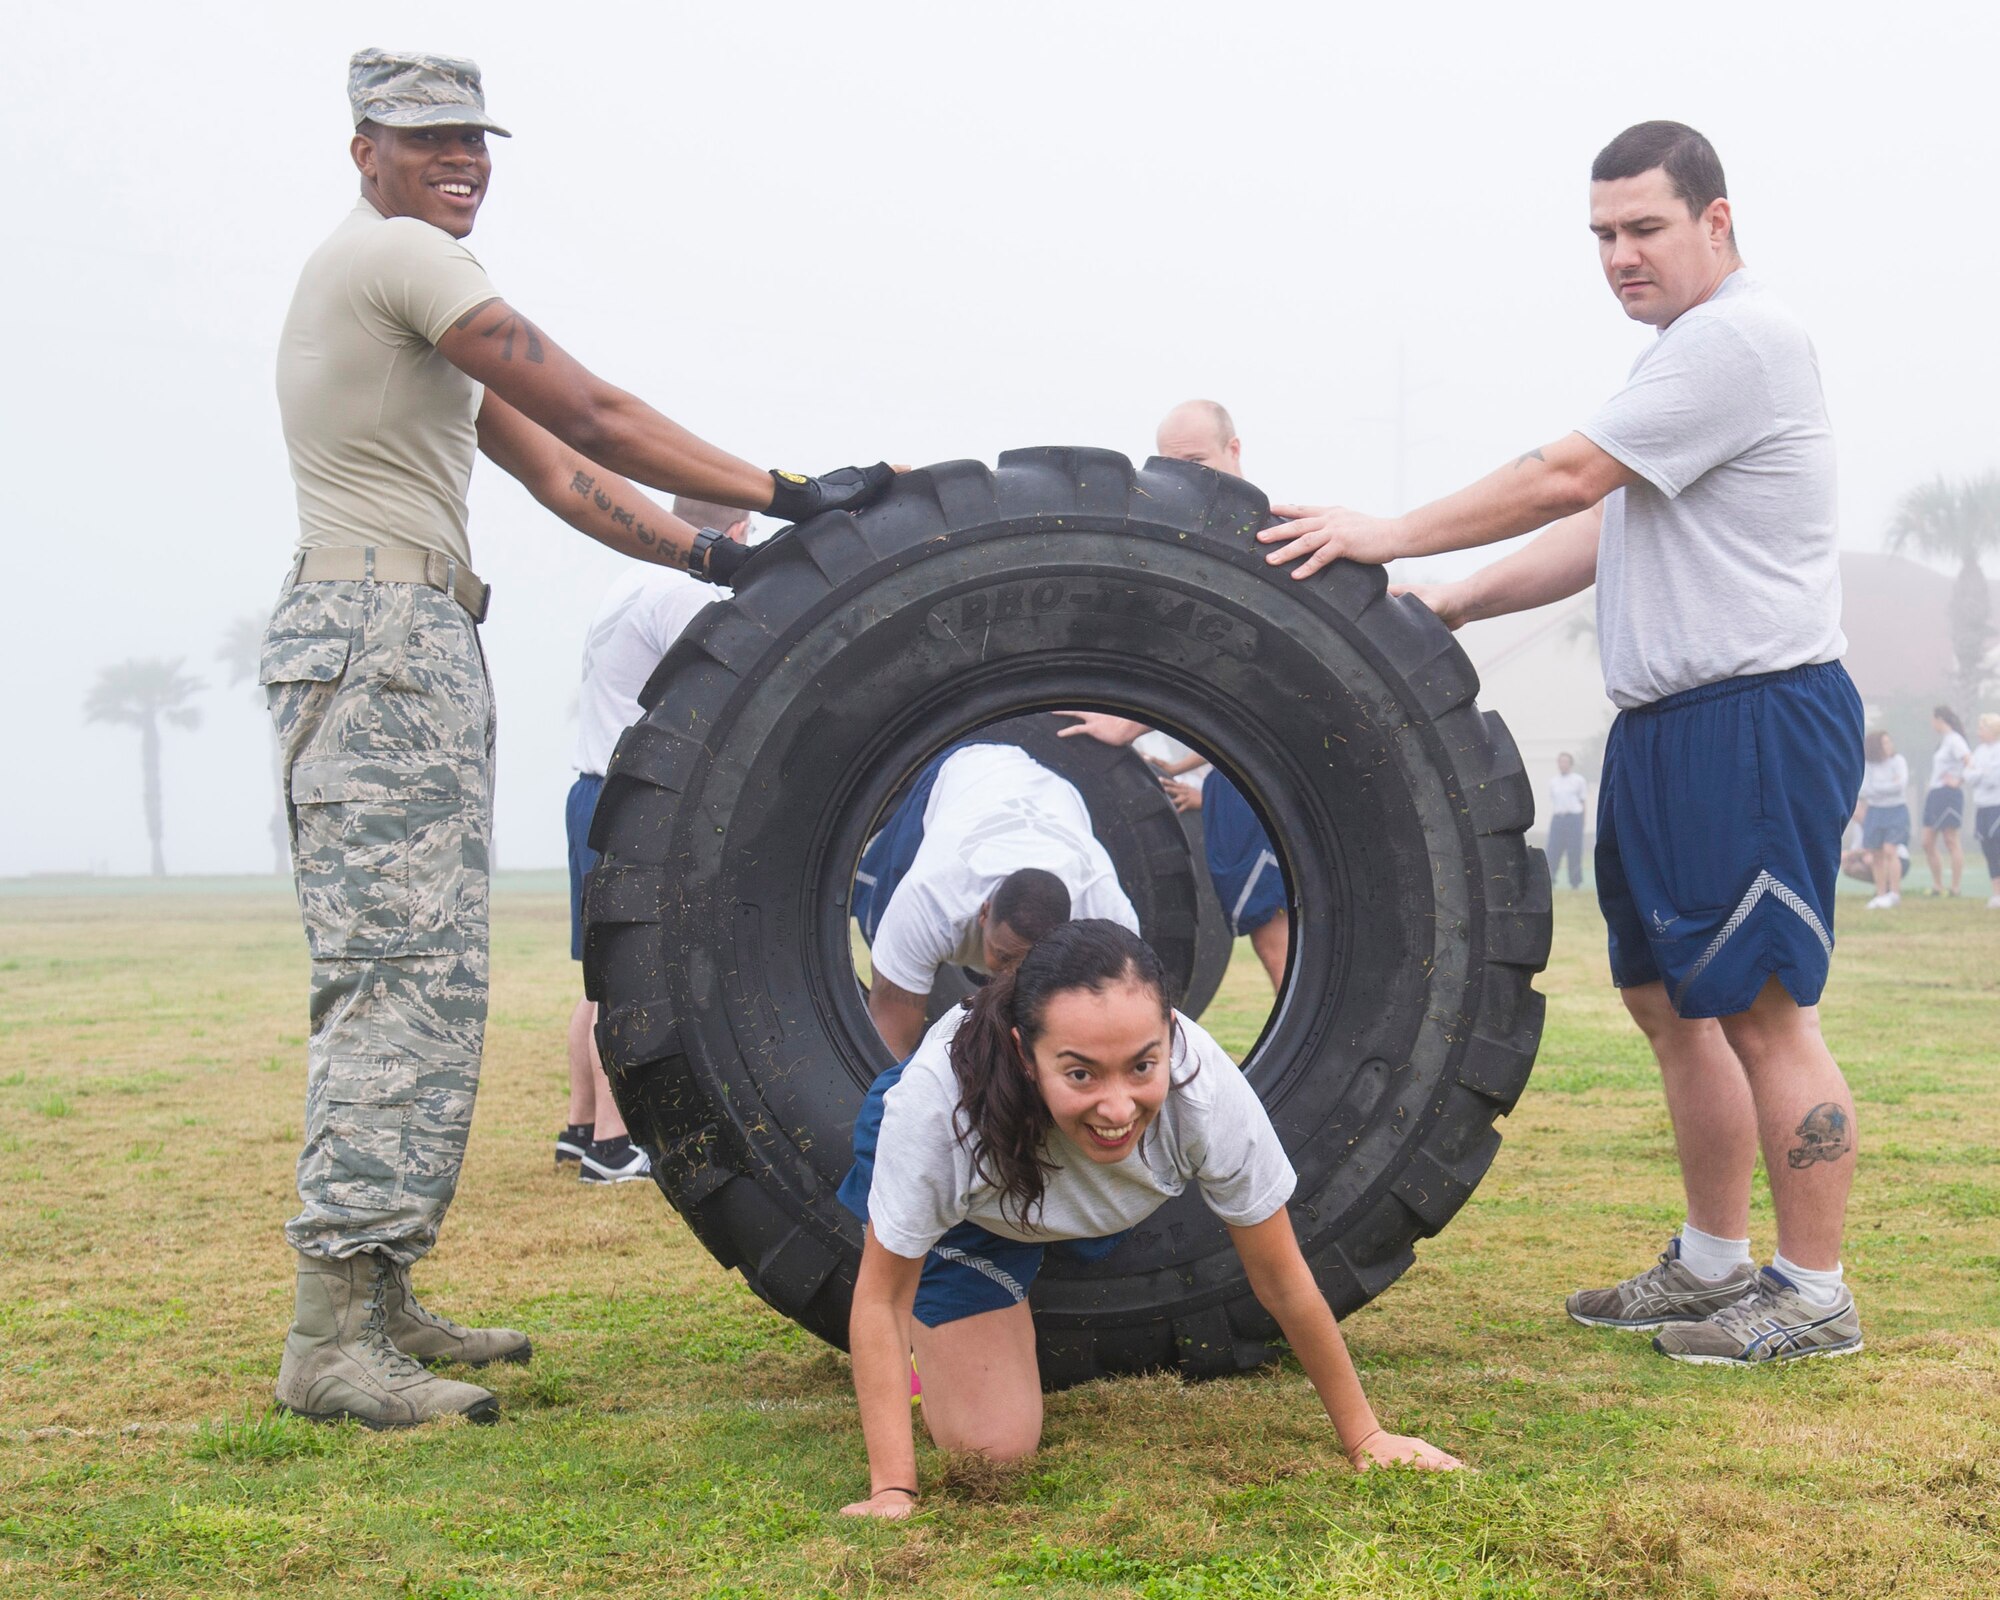 Tech. Sgt. James Norton, 45th Space Wing Safety, and Tech. Sgt. Harry Goldsboro, 920th Operations Support Squadron, hold a tire as Senior Airman Becky Guzman, 45th Comptroller Squadron, crawls through during the Women’s History Month Kick-off Obstacle Course event March 2, 2015 at Warfit Field on Patrick Air Force Base, Fla. (U.S. Air Force photo/Matthew Jurgens)